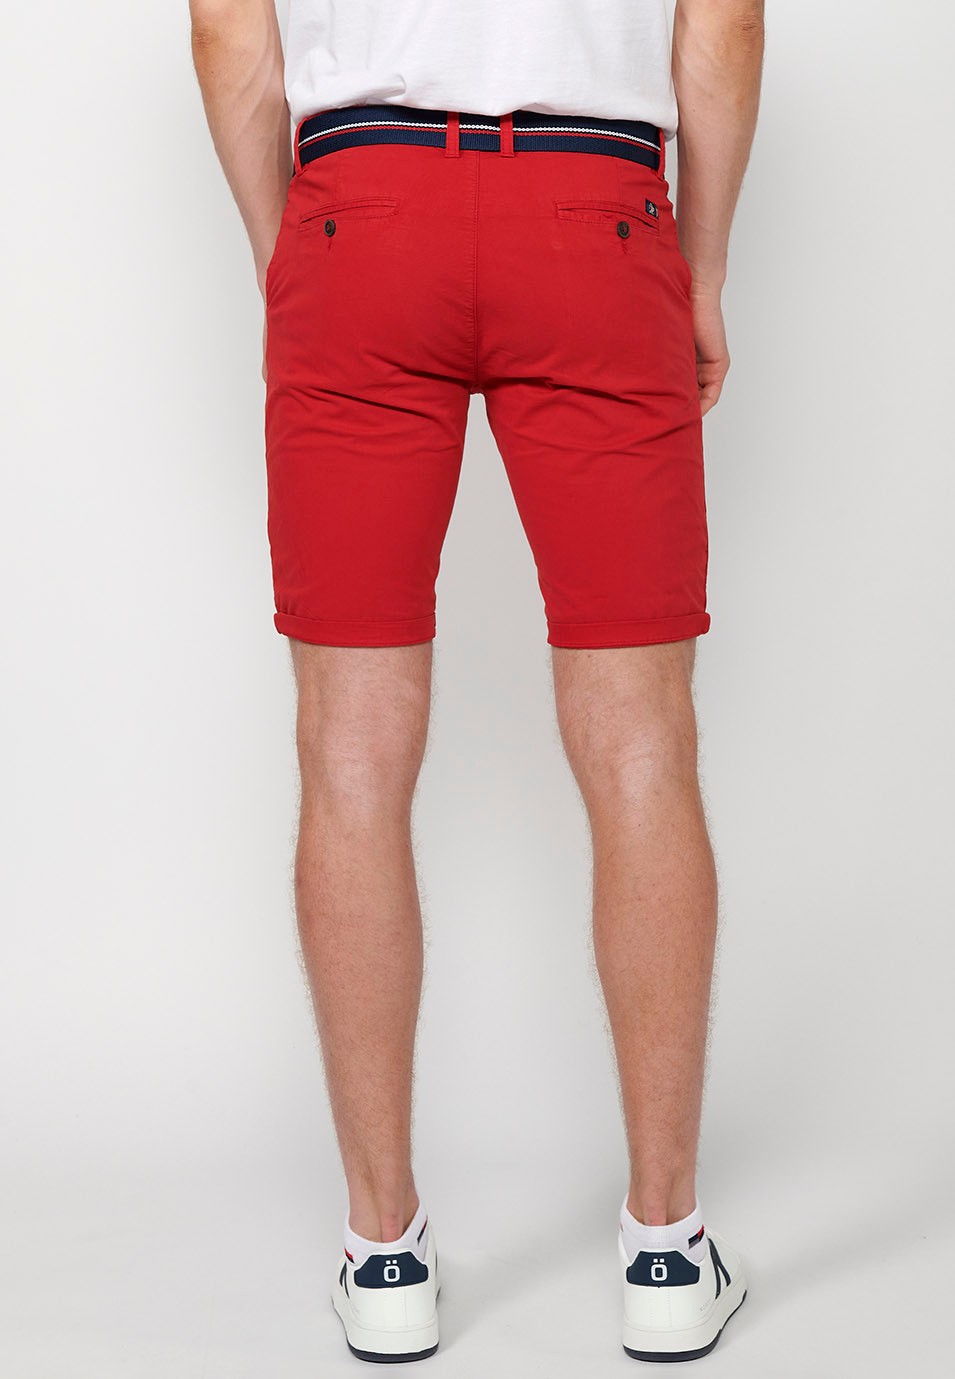 Shorts with cuffed finish with front closure with zipper and button and belt in Red for Men 2